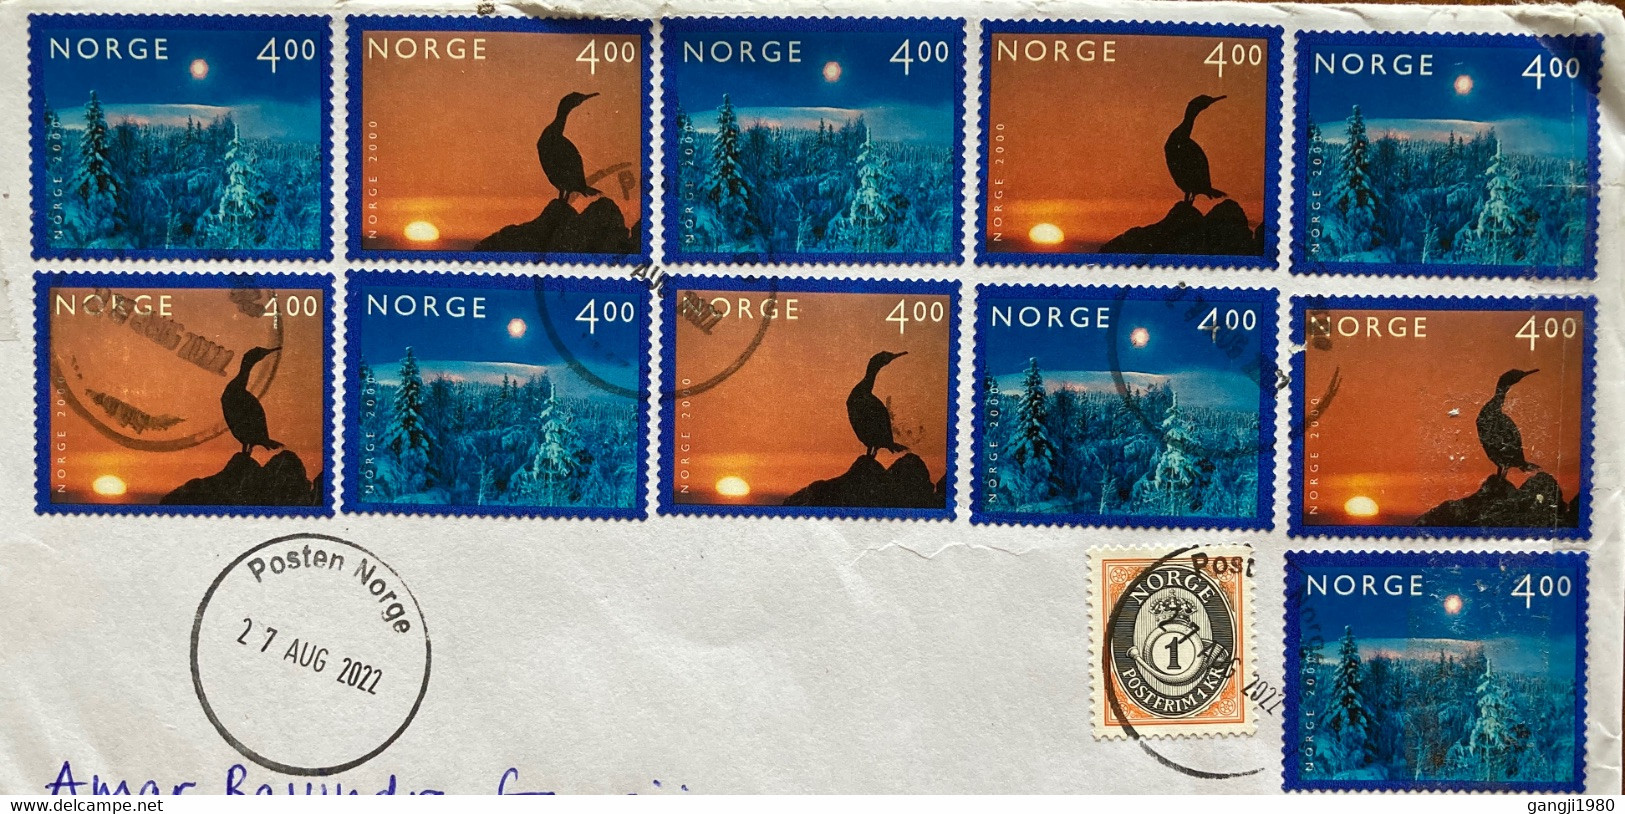 NORWAY,2022,USED COVER 1 SELF ADHESIVE YEAR 2000 MILLENNIUM STAMPS 11 AIRMAIL VIGNETTE,POSTEN NORGE CANCEL TO IN - Brieven En Documenten